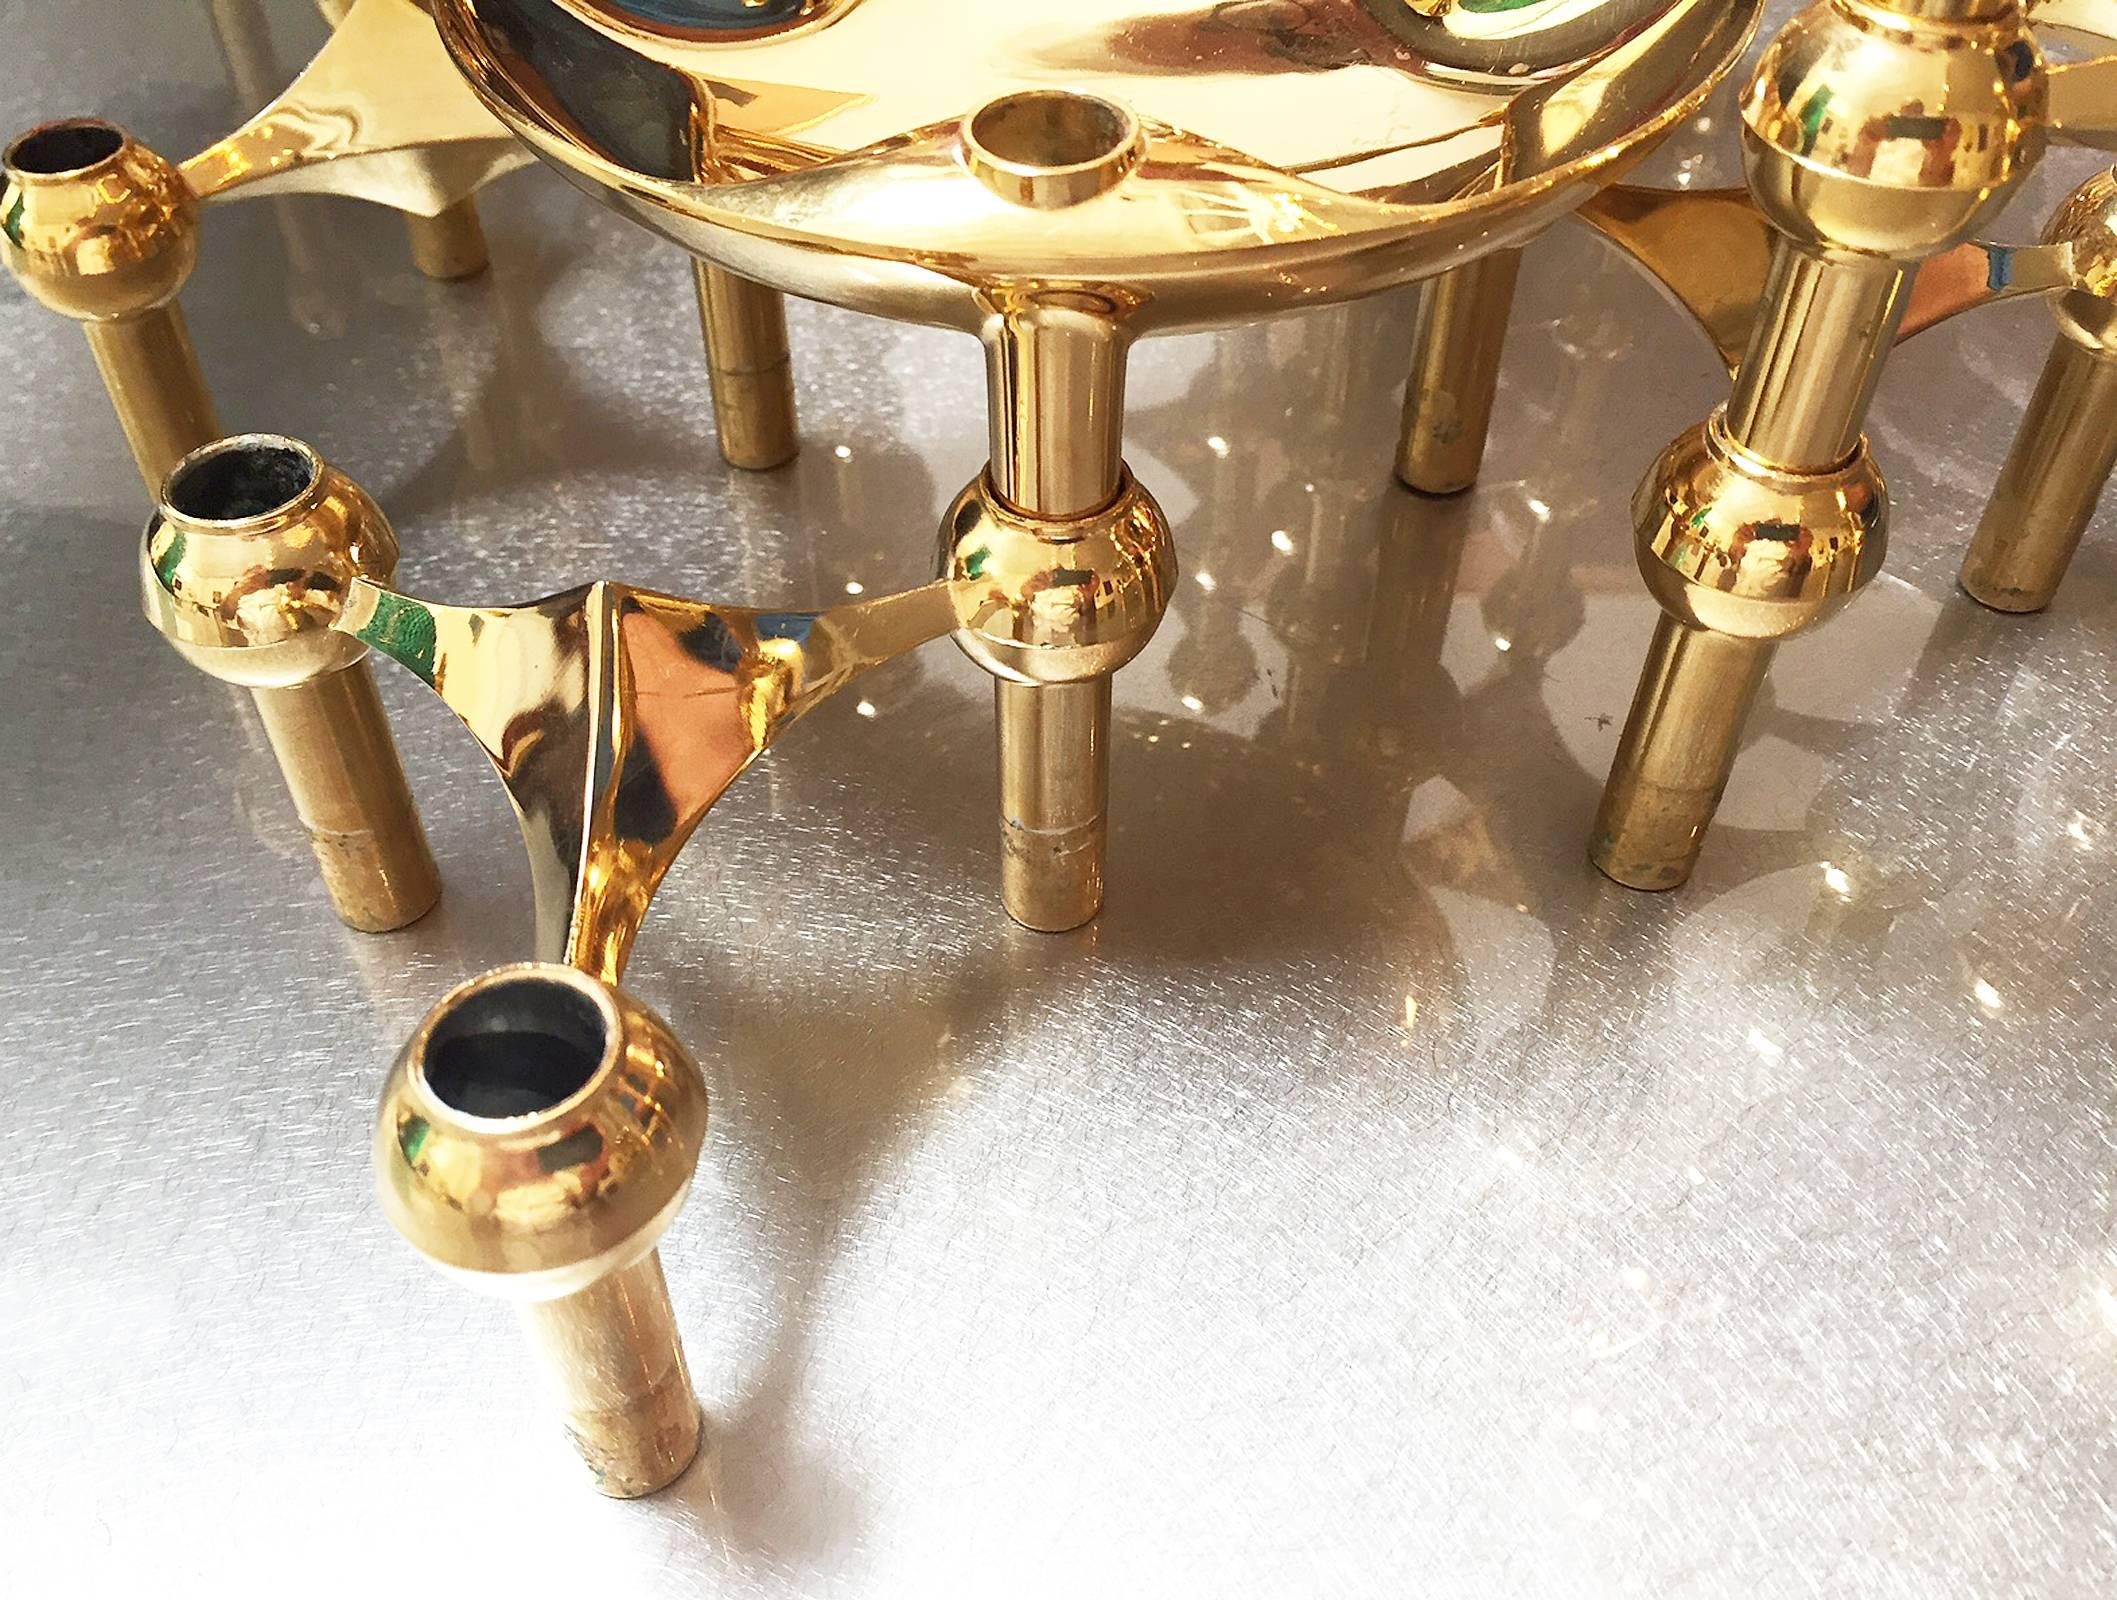 Brass candleholder system. 28 sculpted brass pieces can be separated or connected in an endless combination of arrangements. Use all of the pieces together for a centerpiece or individually. This set includes two shallow bowls. Made by BMF, Germany,